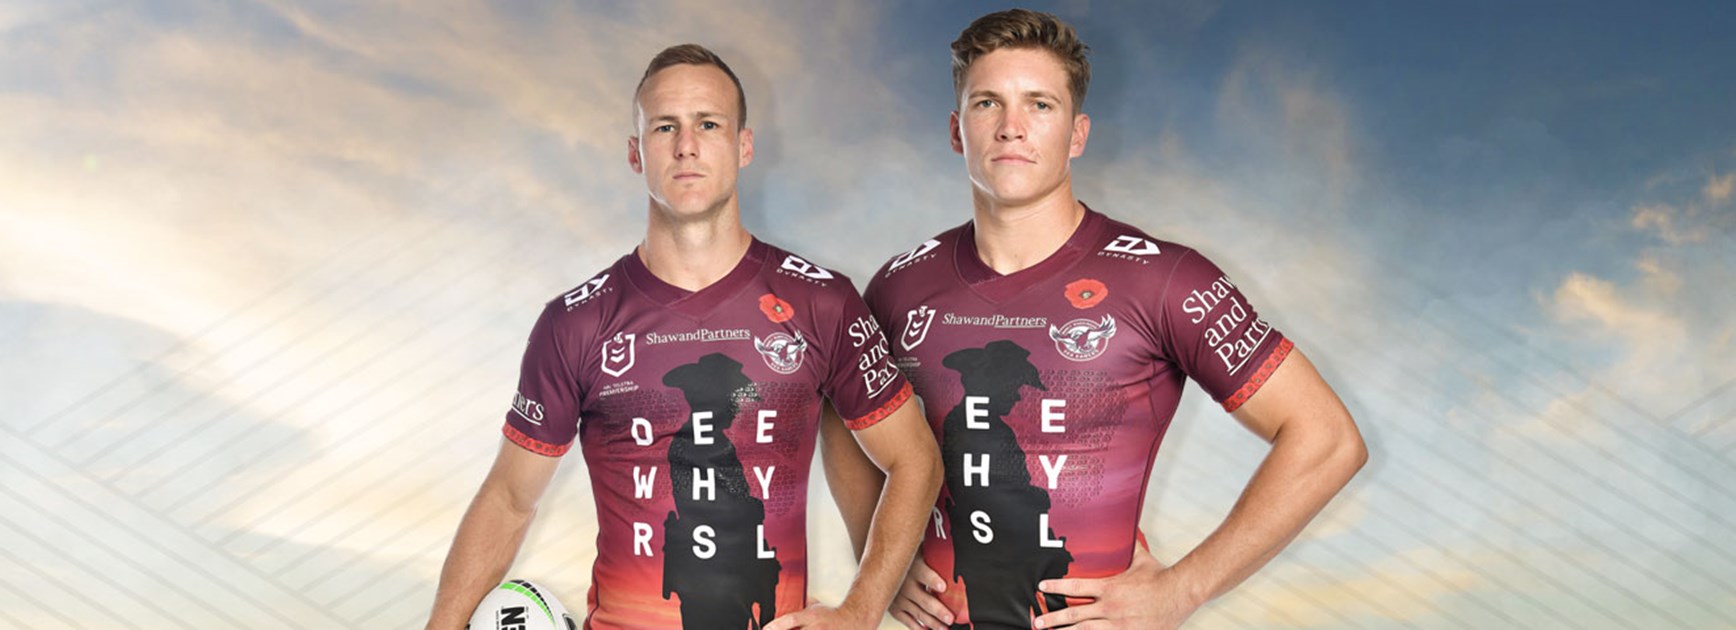 Sea Eagles launch Dee Why RSL ANZAC Round jersey